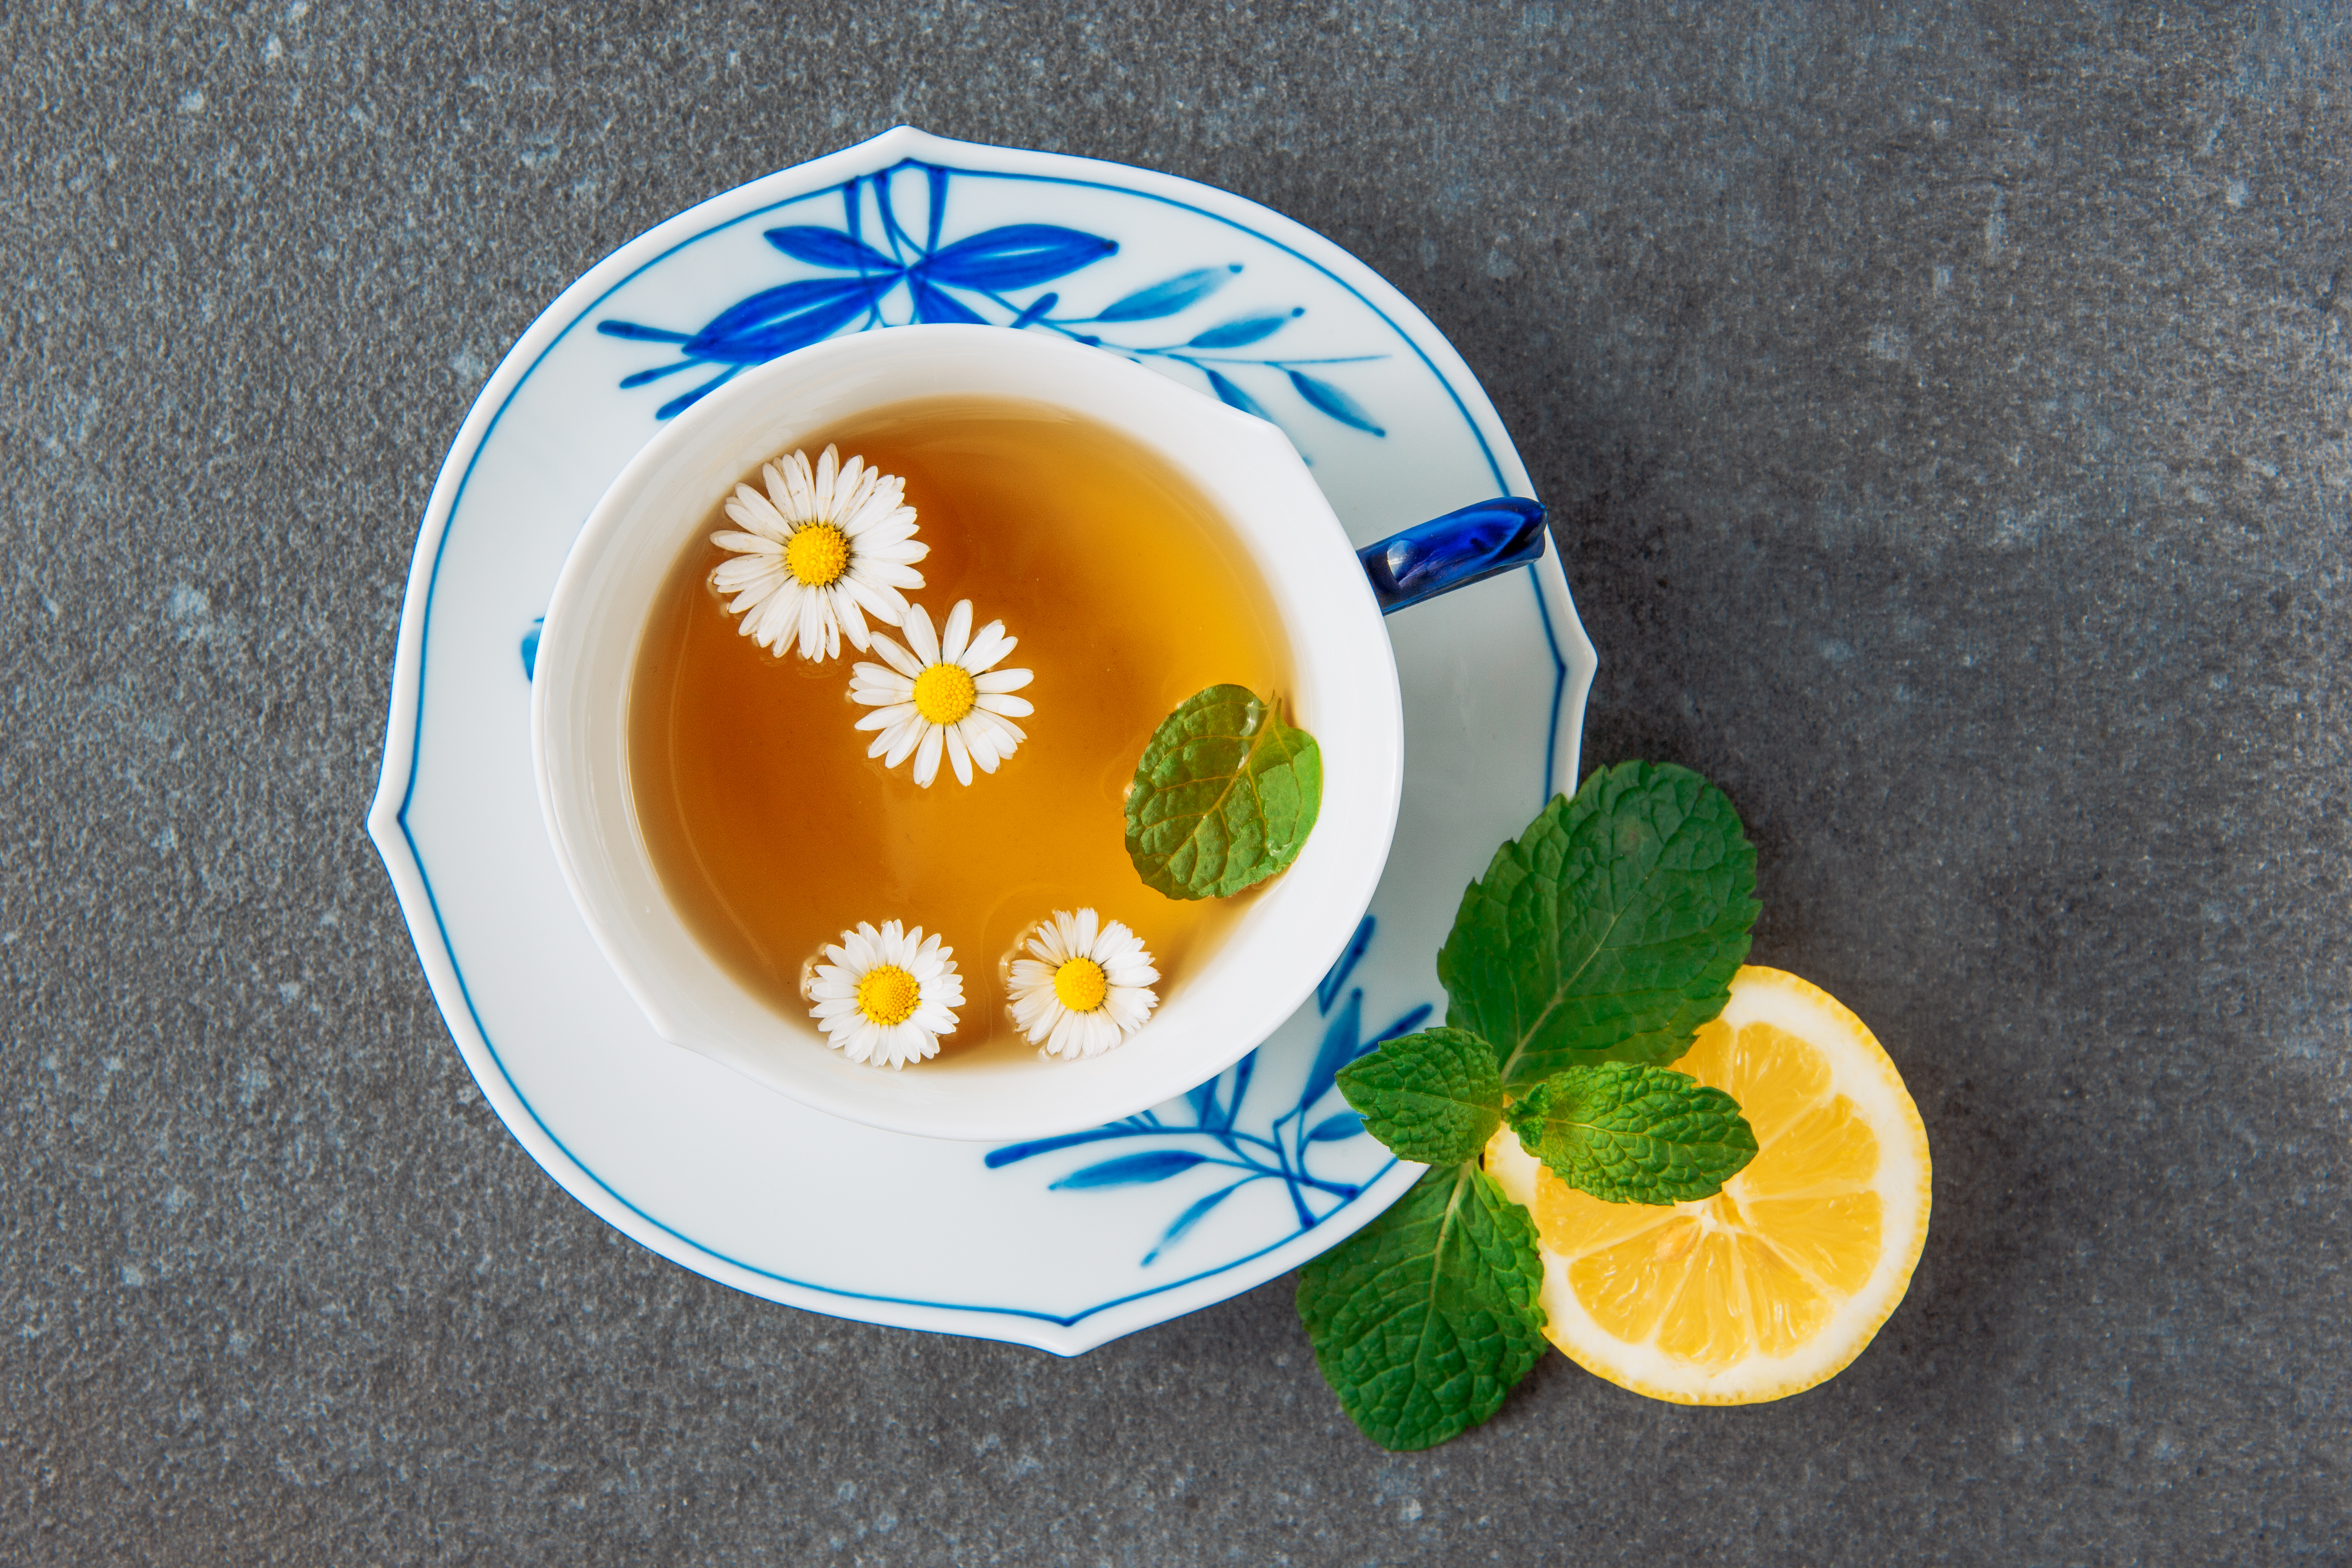 brewed-chamomile-tea-with-half-lemon-green-leaves-cup-saucer-grey-stucco-background-top-view